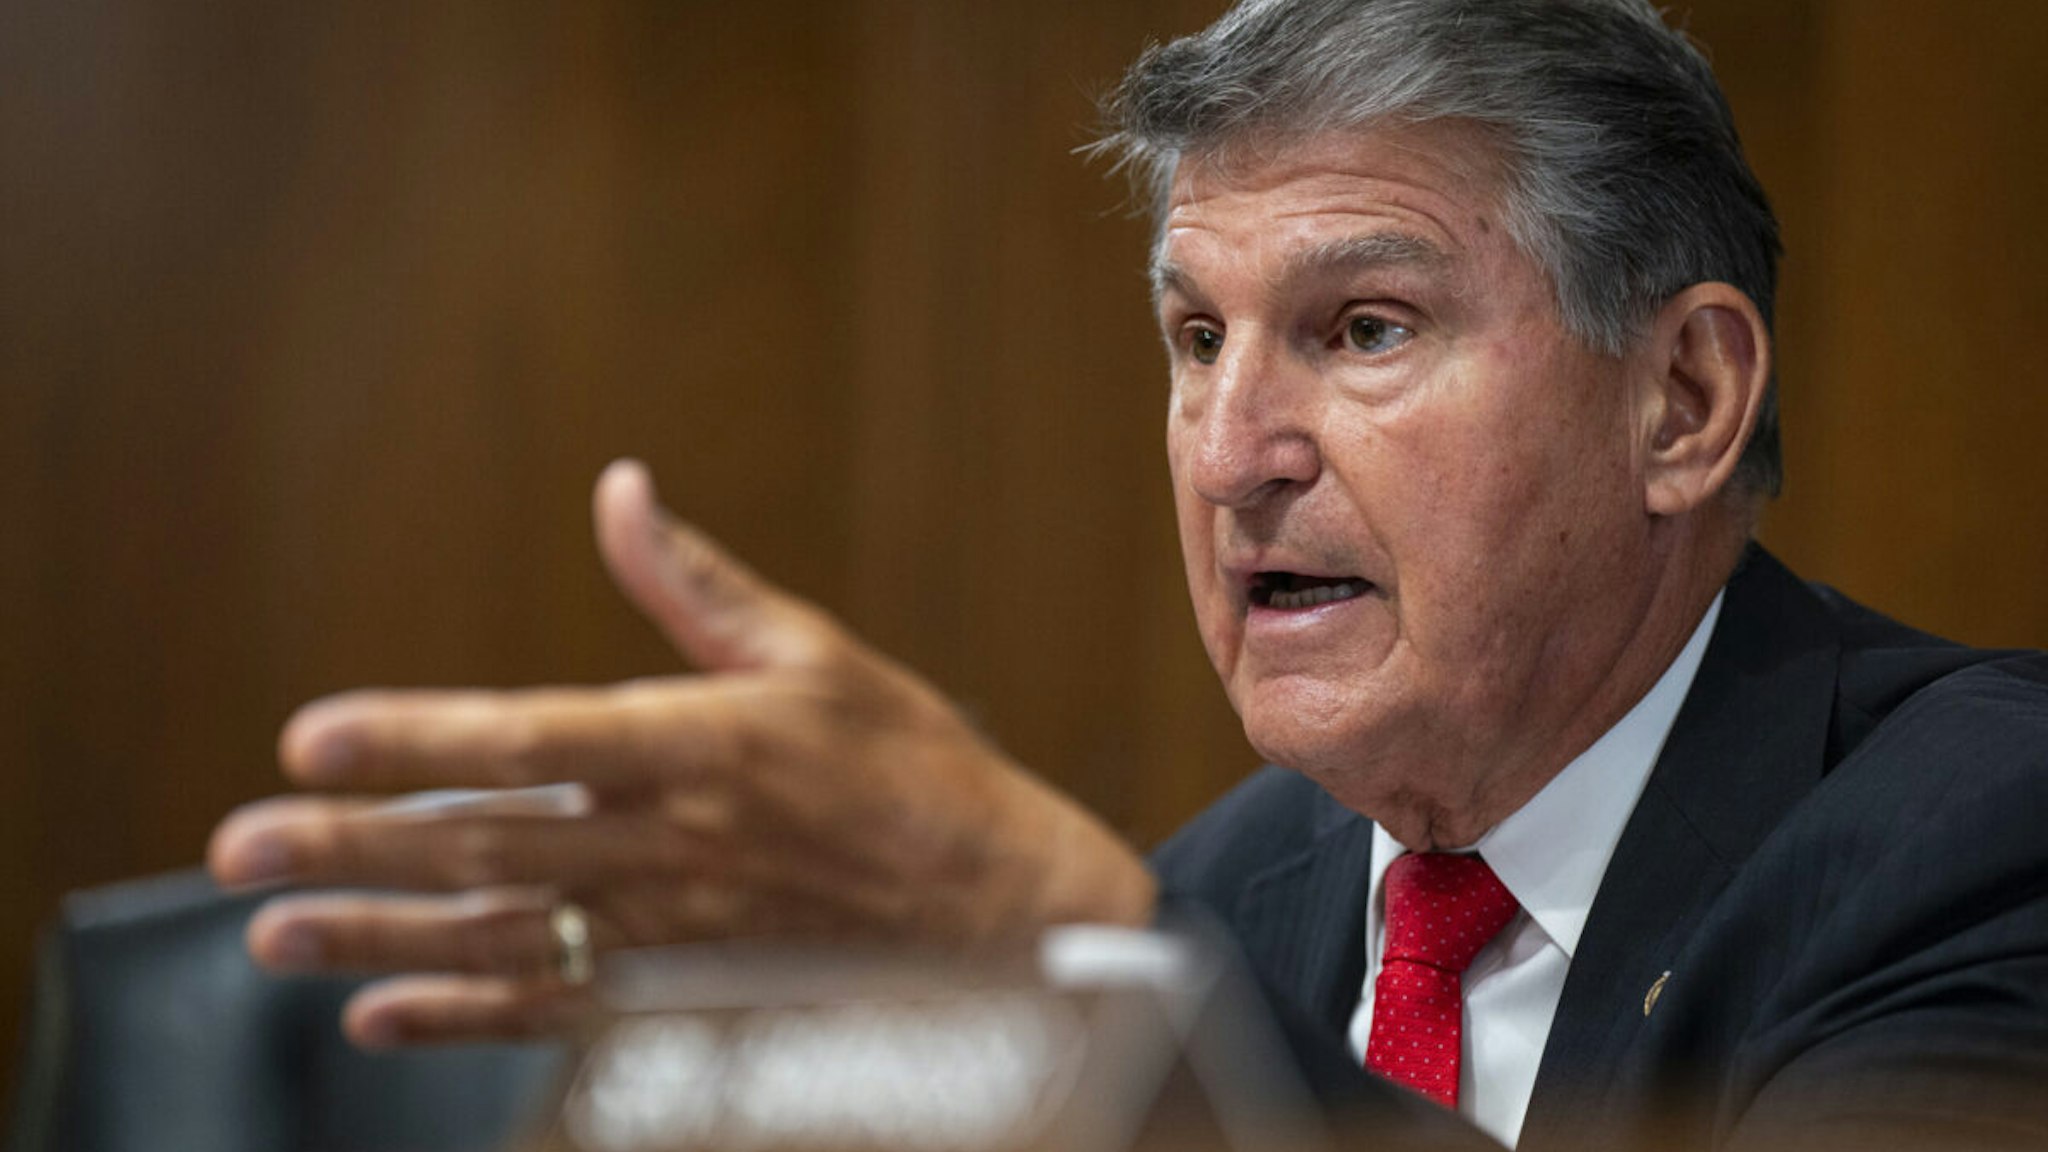 Senator Joe Manchin, a Democrat from West Virginia and chairman of the Senate Energy and Natural Resources Committee, speaks during a hearing in Washington, DC, US, on Thursday, Sept. 7, 2023.